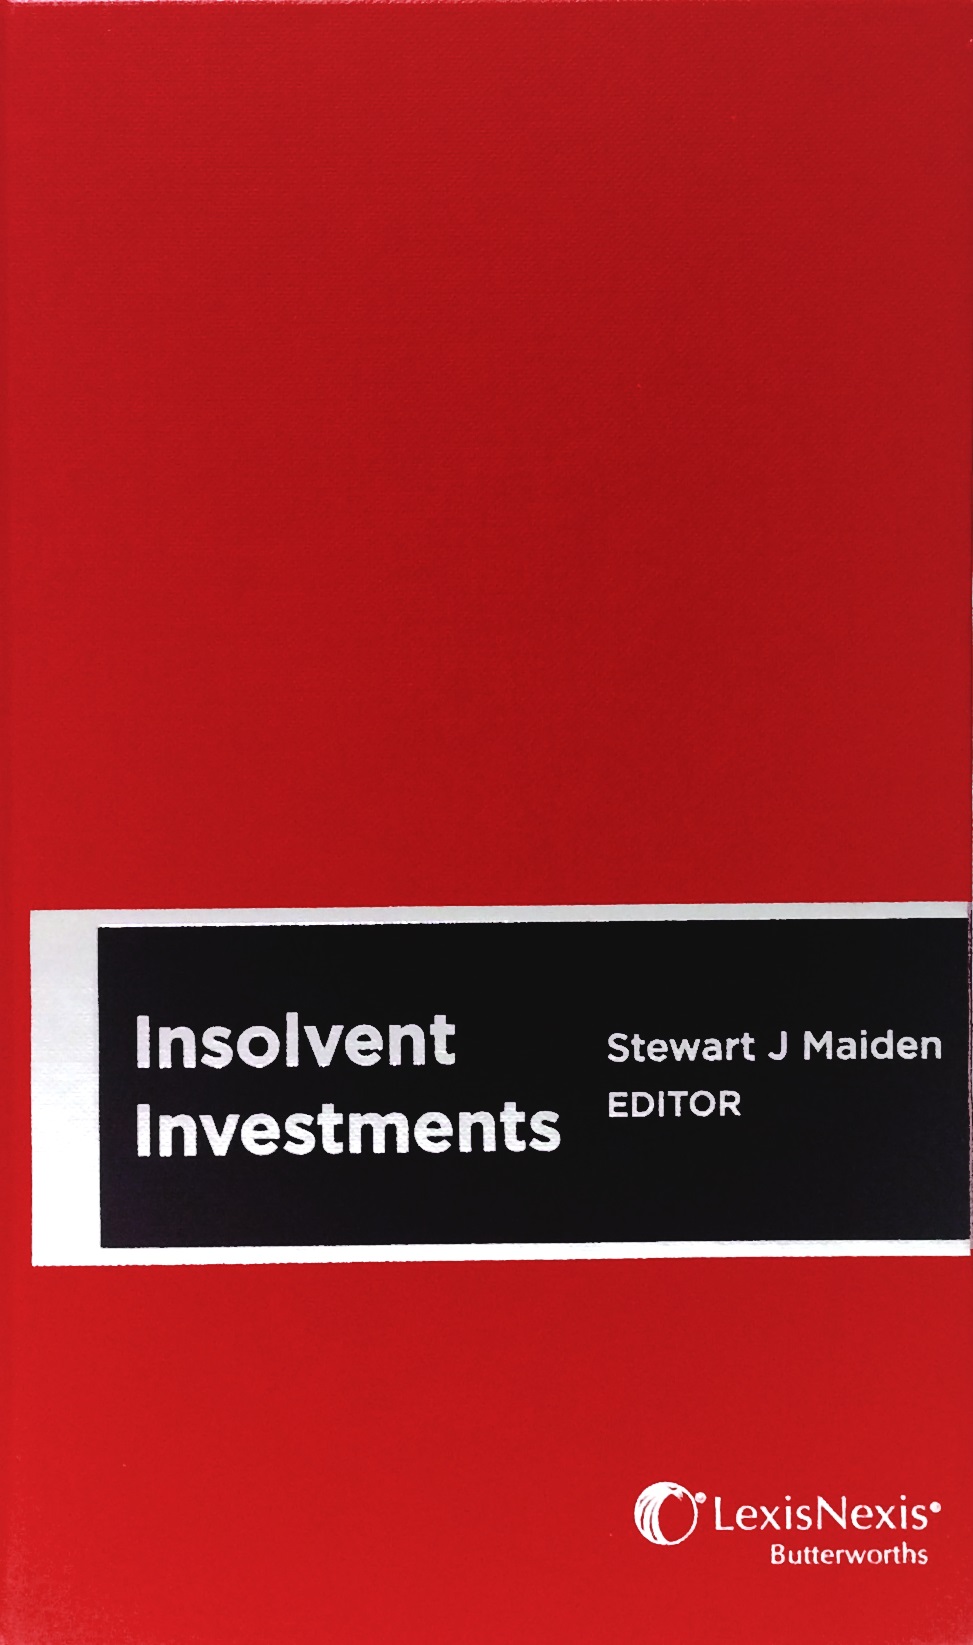 Insolvent Investments